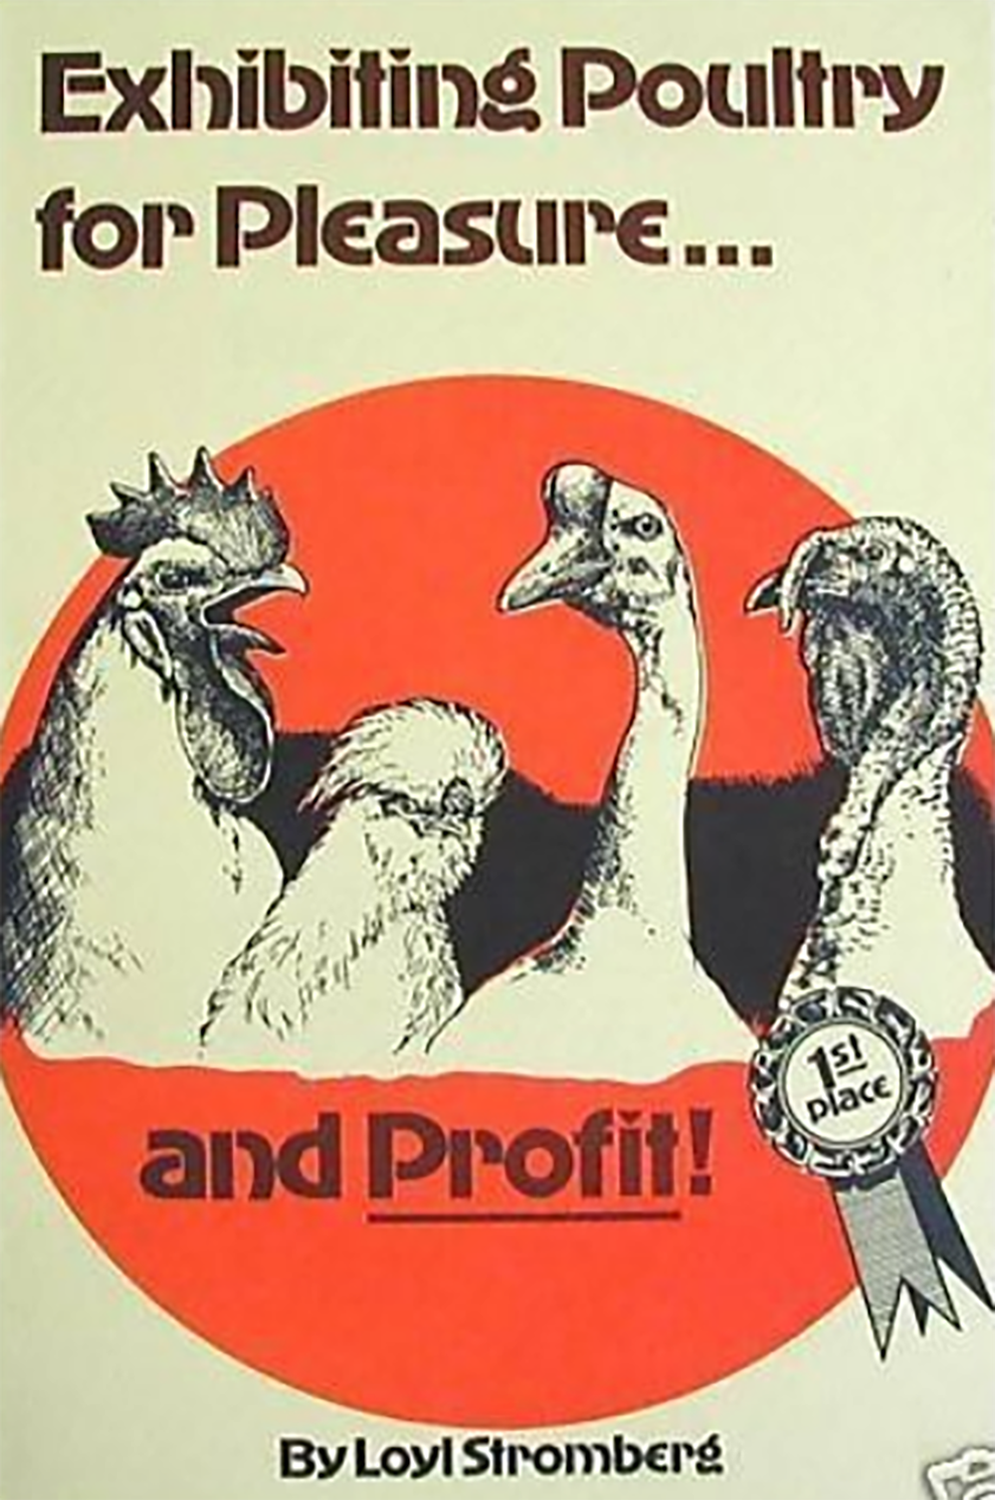 Exhibiting Poultry for Pleasure and Profit